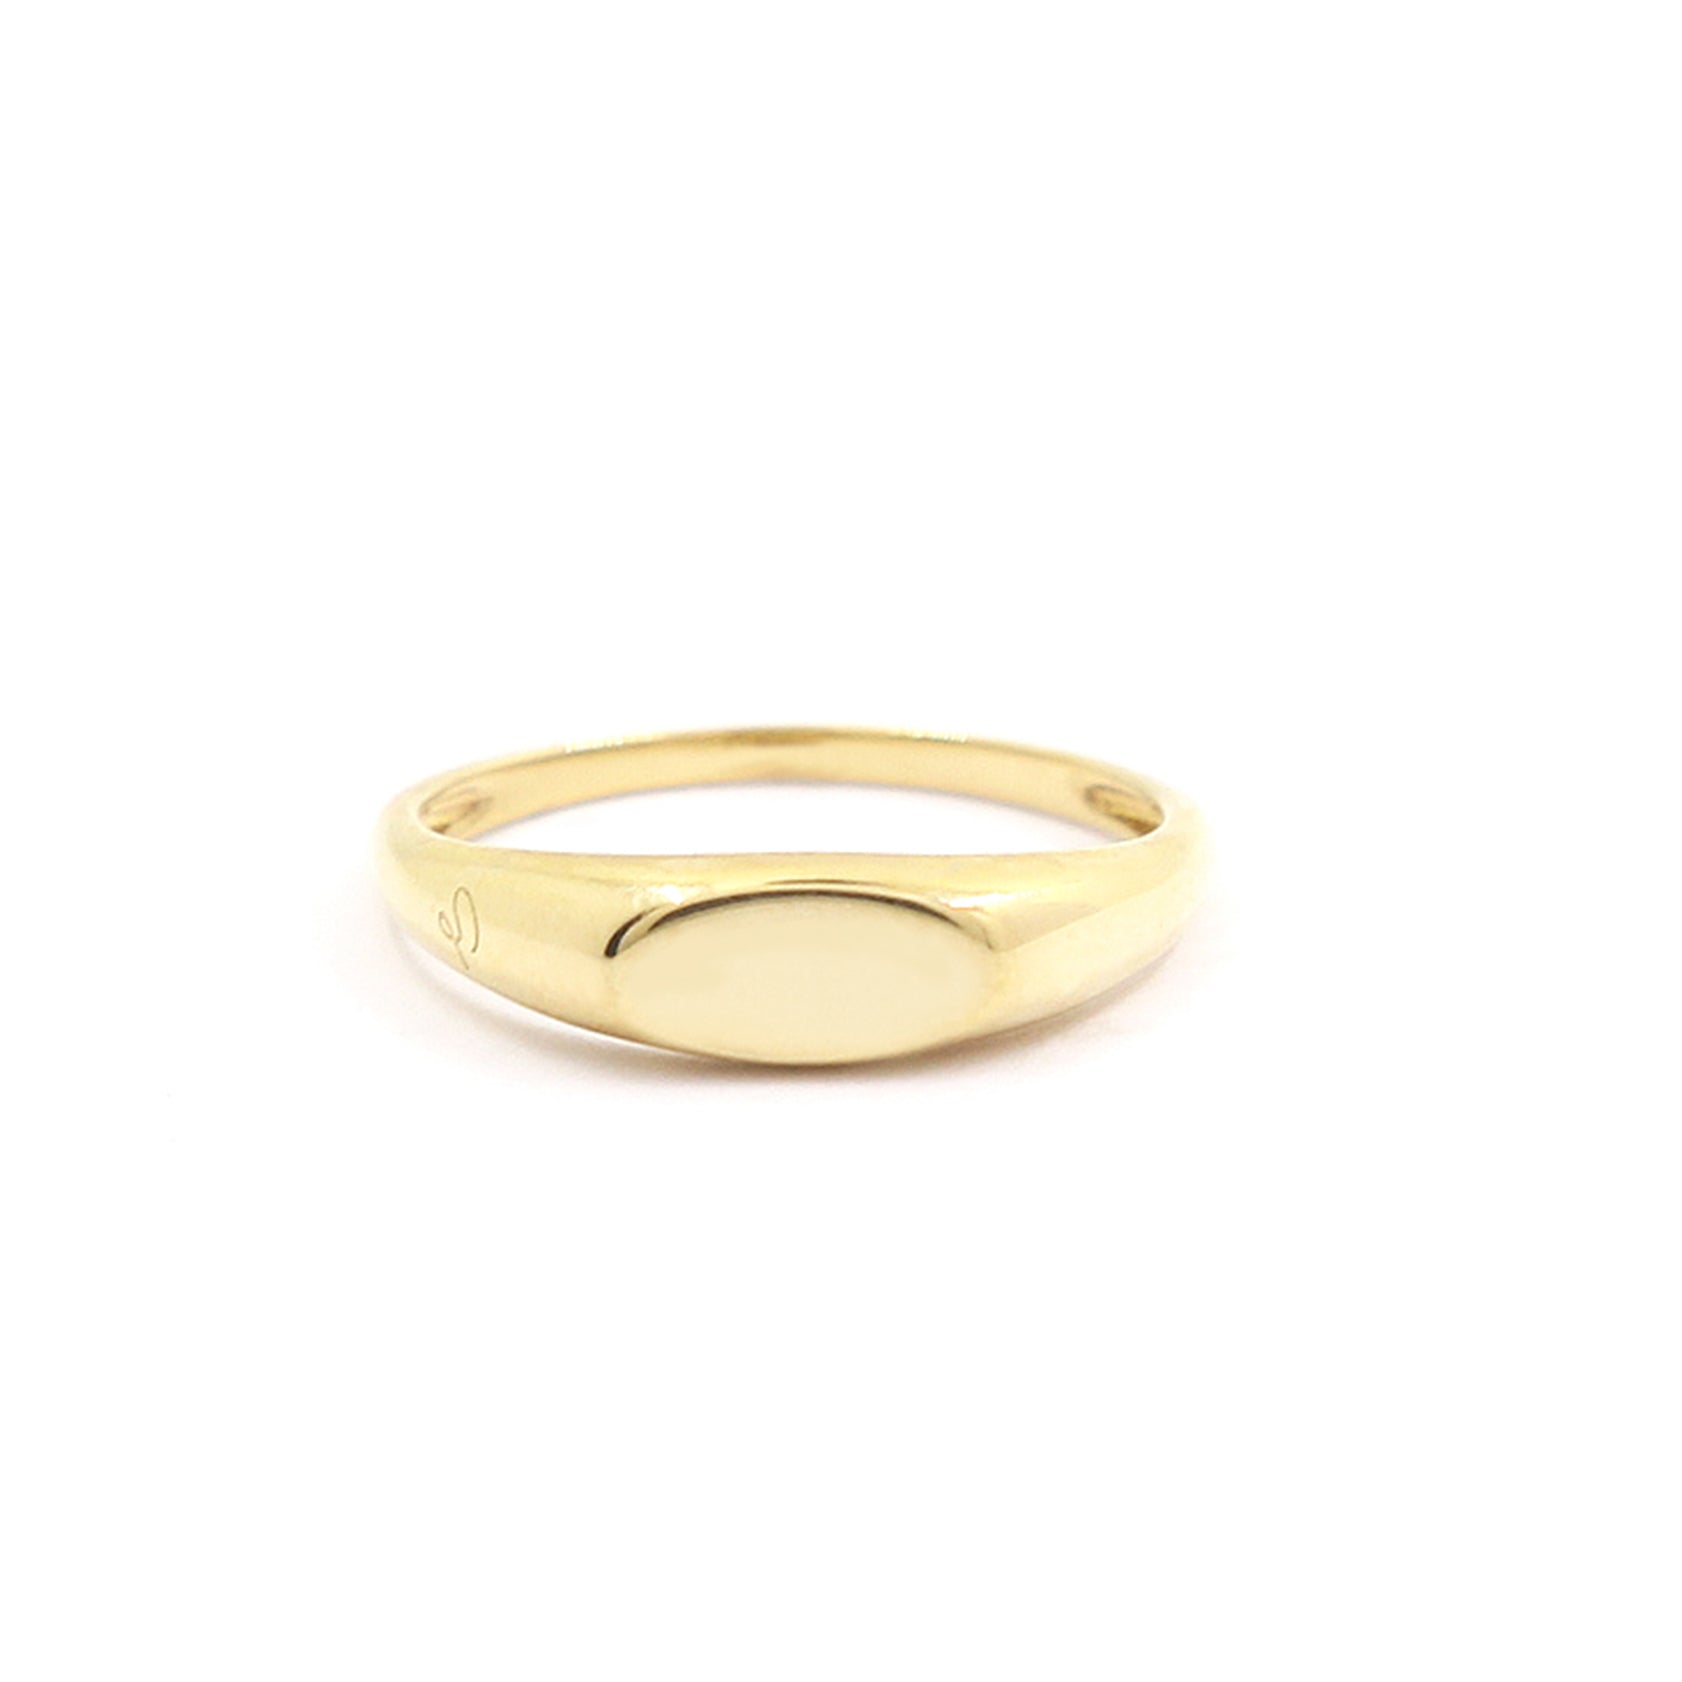 9K GOLD ANDREA SMALL OVAL SIGNET RING